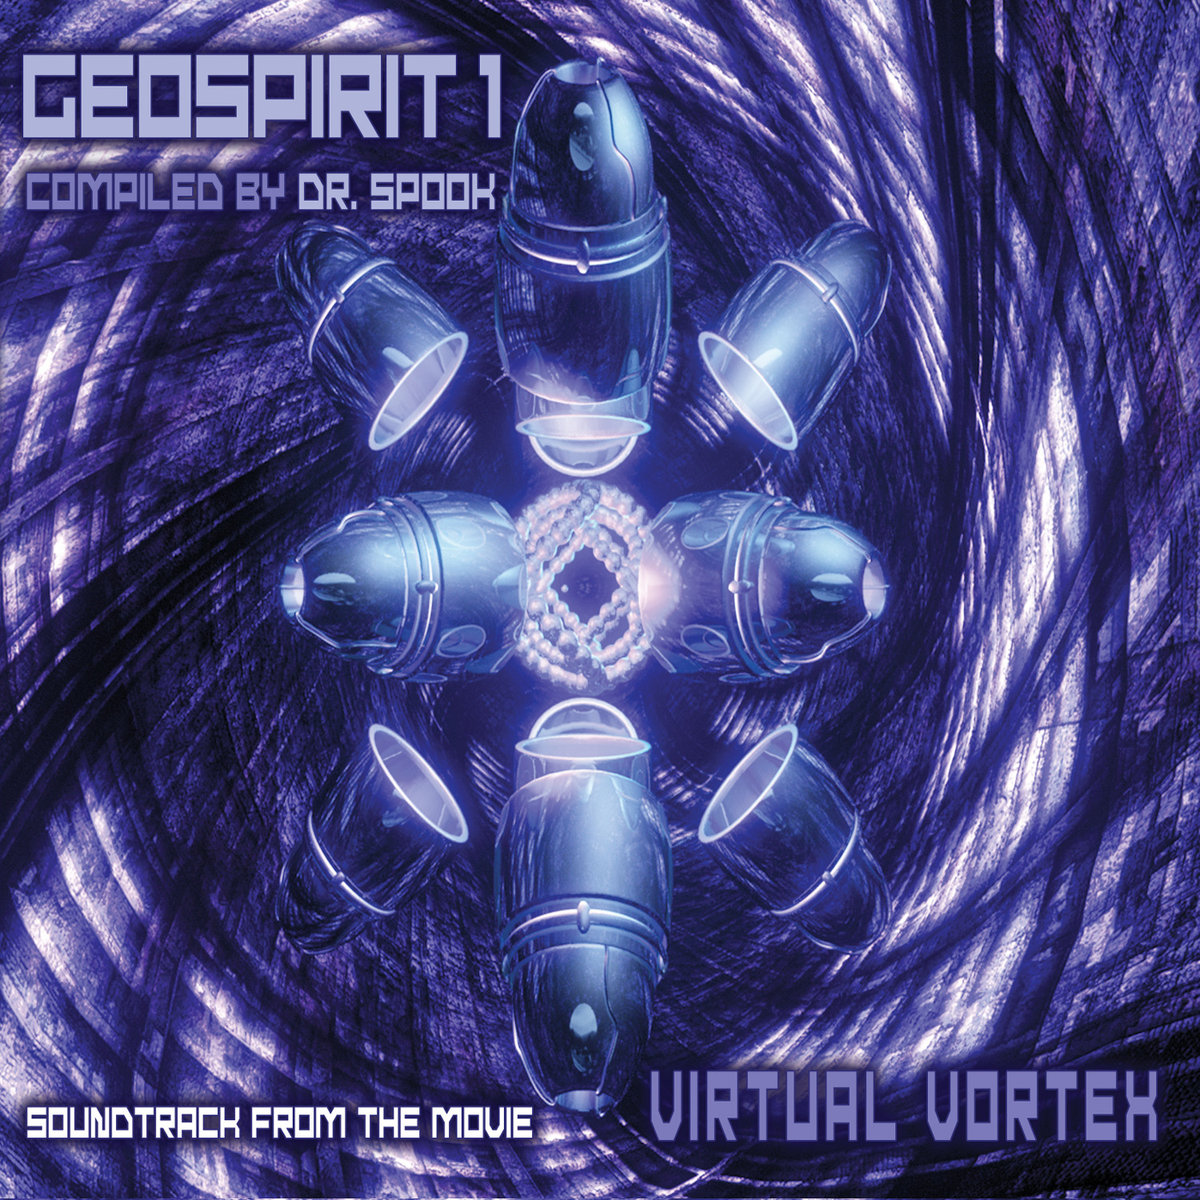 Mr. Peculiar - Crystal Myth @ 'Various Artists - Geospirit 1: Virtual Vortex (Compiled by Dr. Spook)' album (electronic, goa)